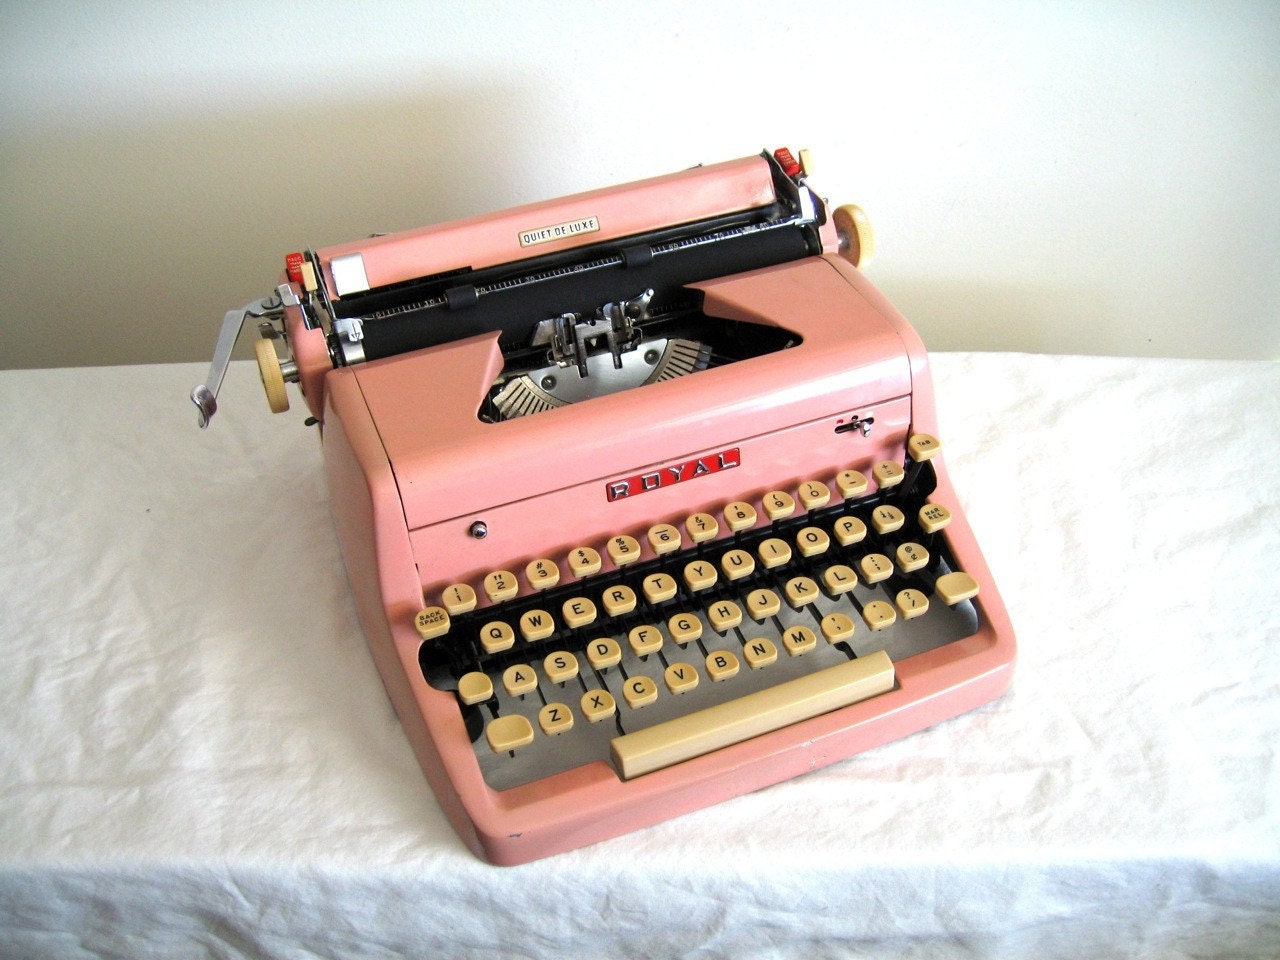 PINK Royal Quiet De Luxe Typewriter - Great Valentine's Day gift - Last one in stock